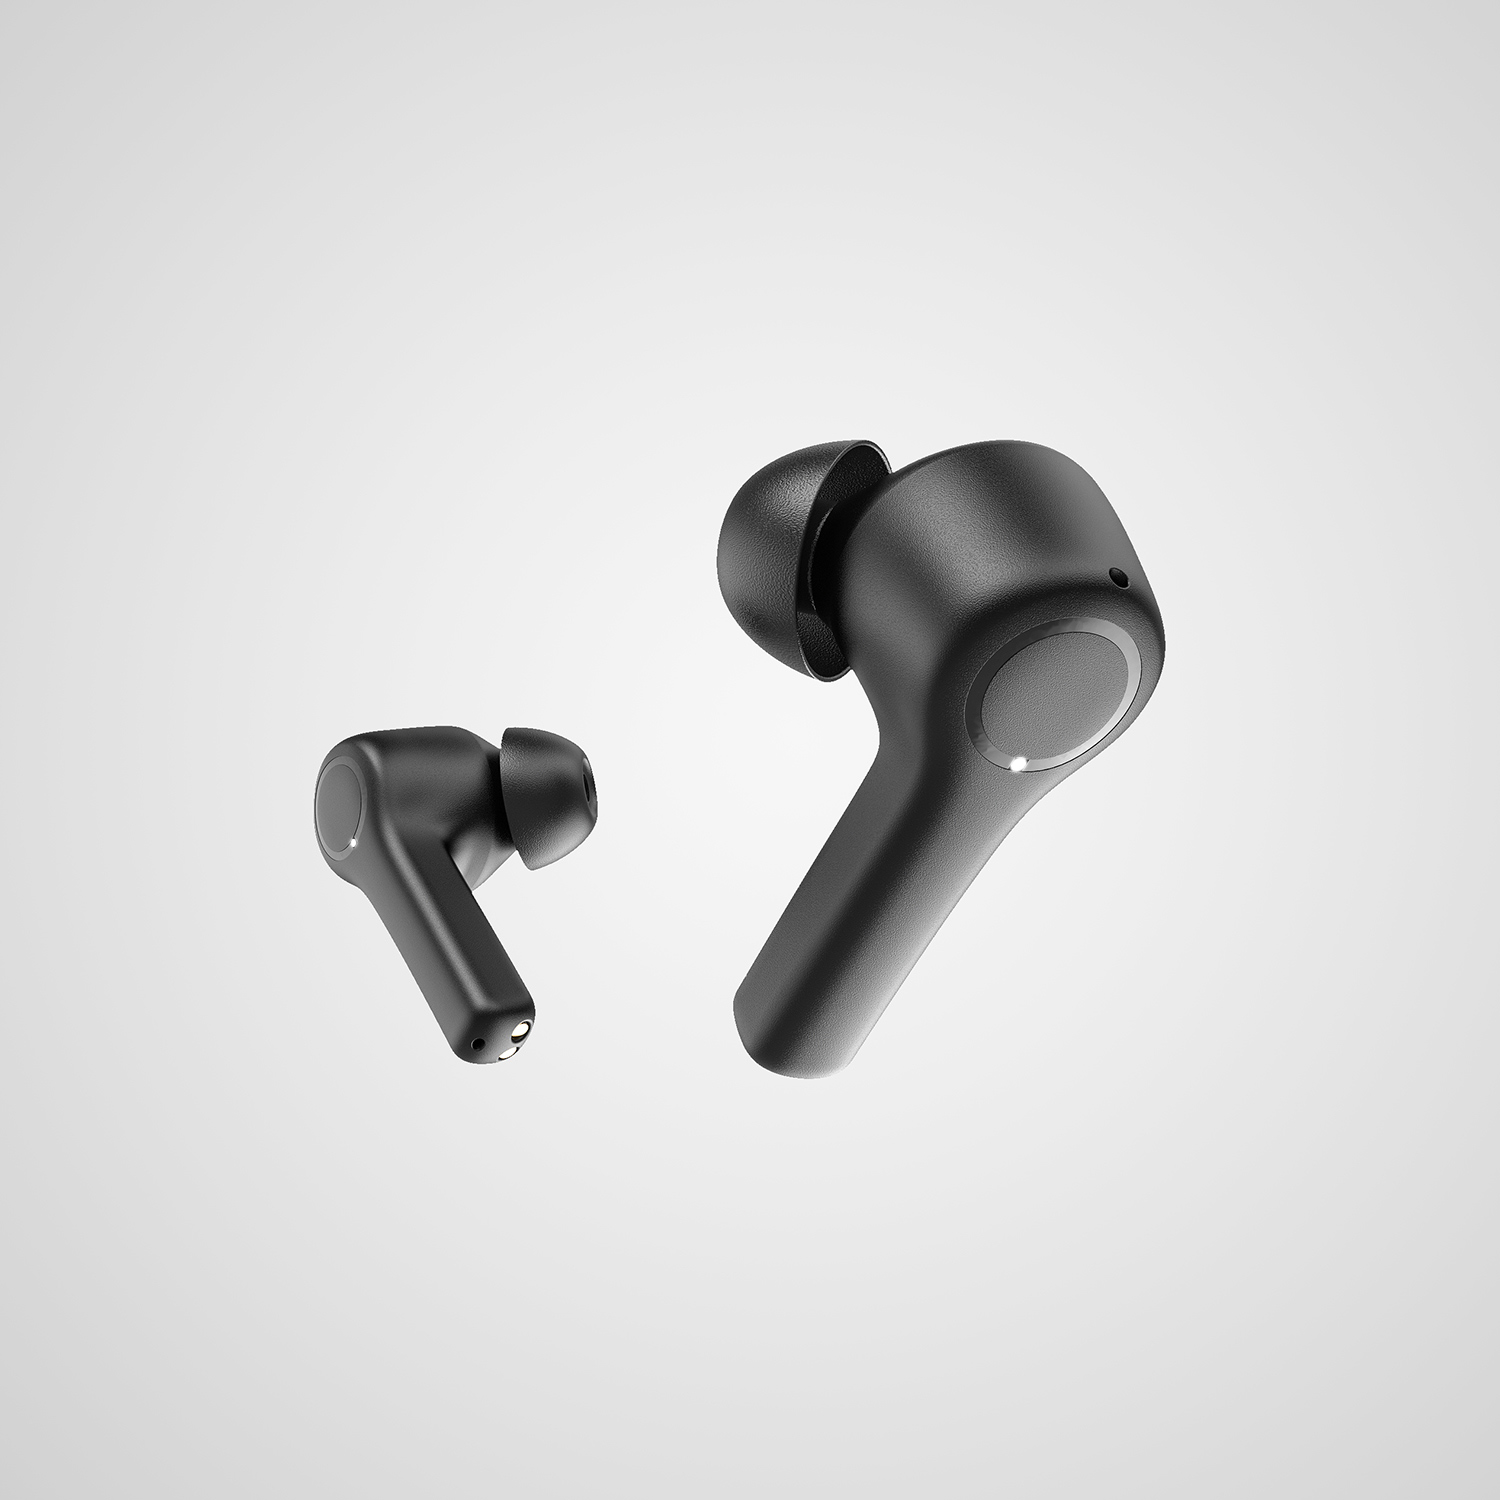 Wholesale Best Wireless ANC Tws Earbuds Easy To Use